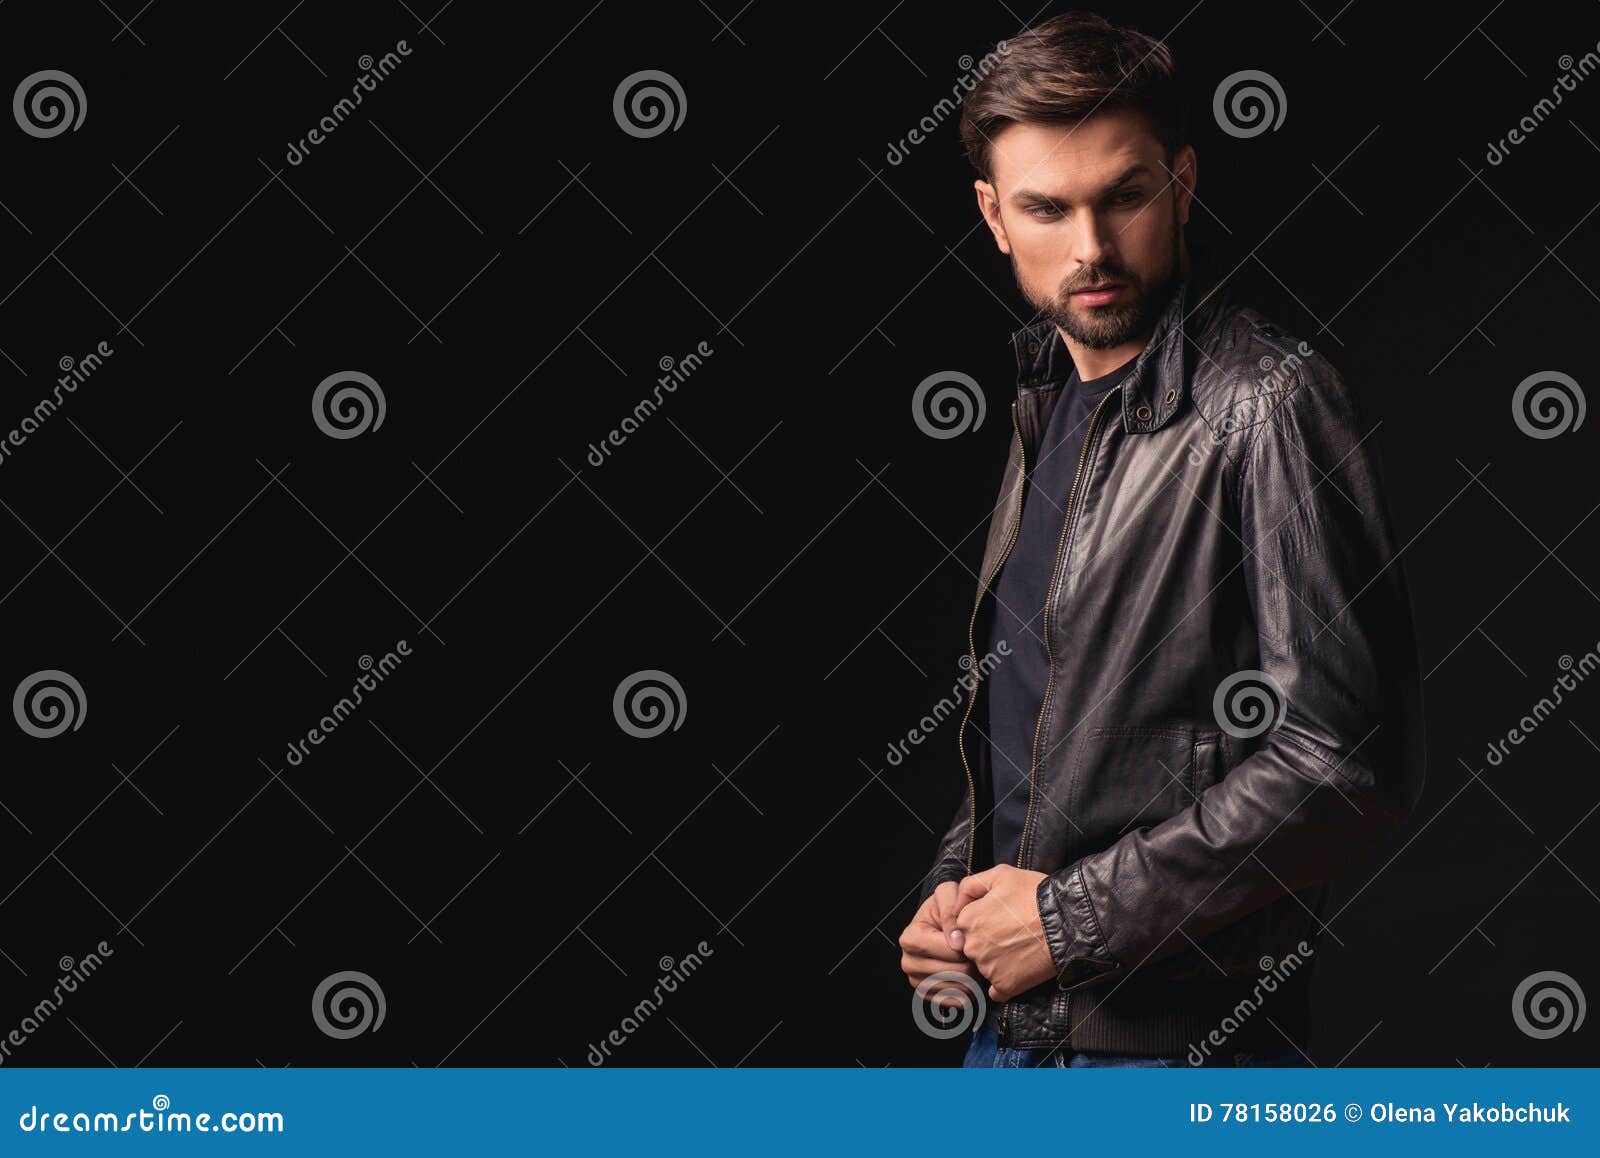 Confident Guy Thinking with Seriousness Stock Photo - Image of brunette ...